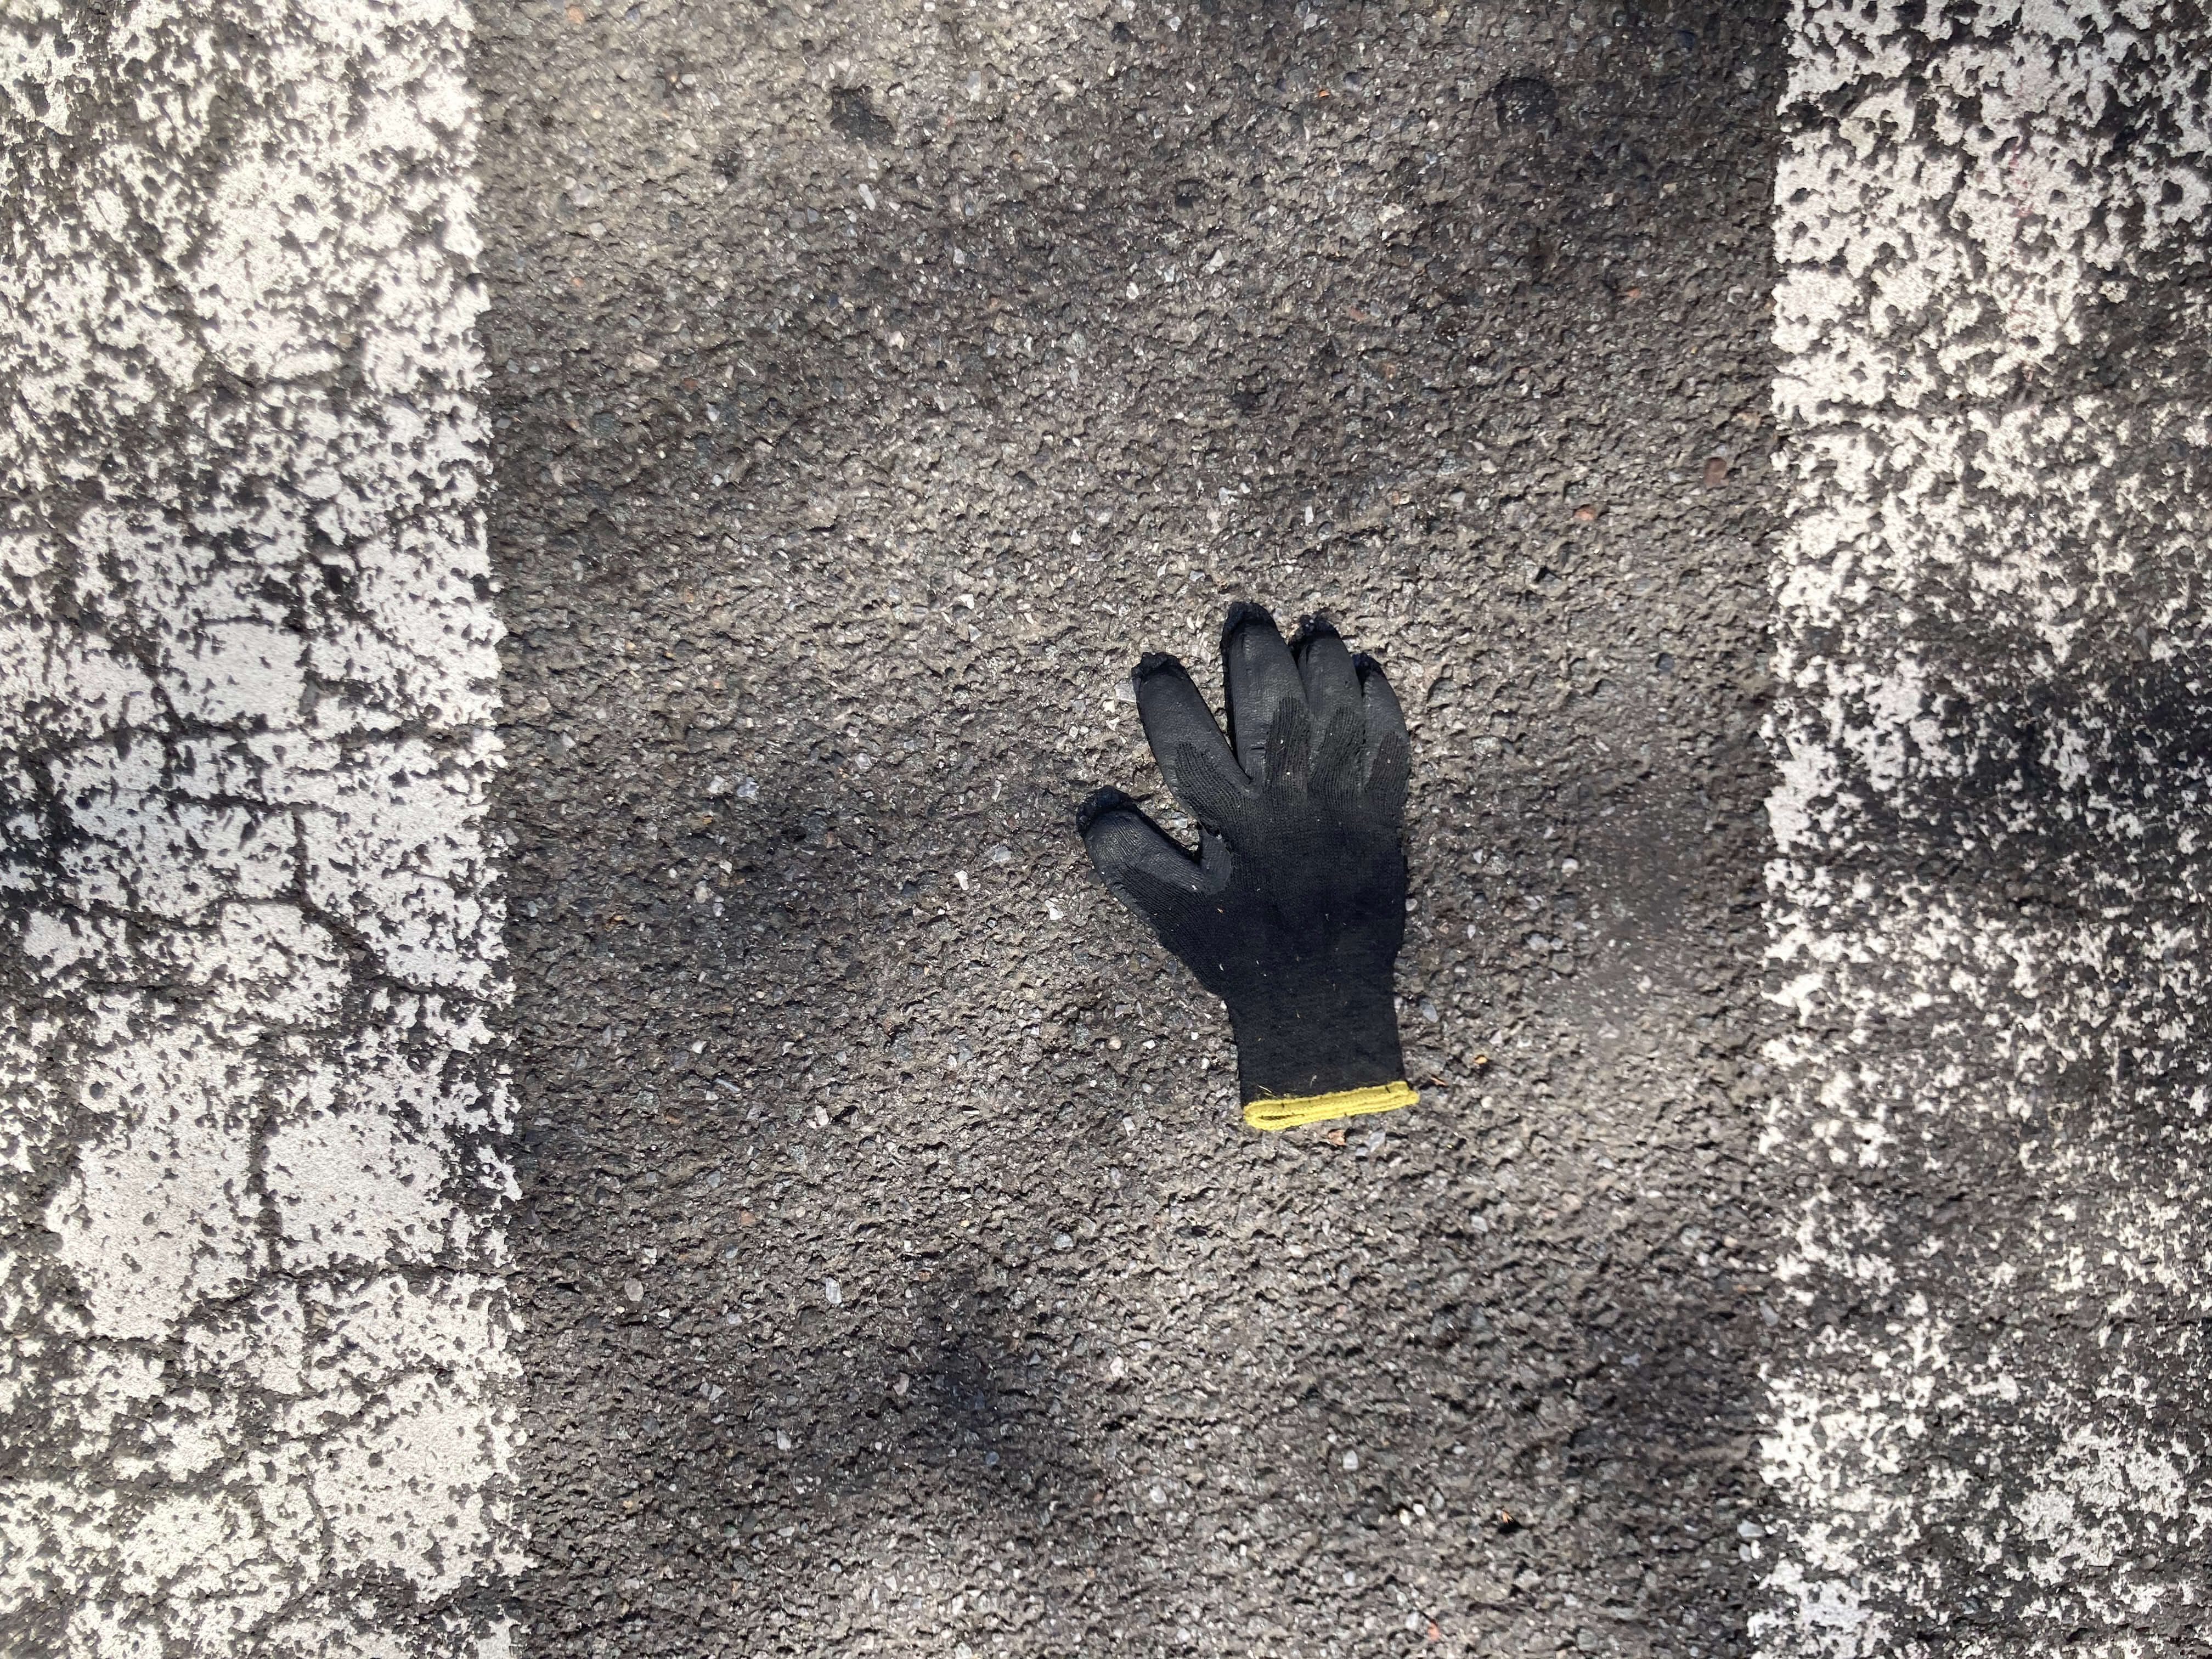 lost gloves